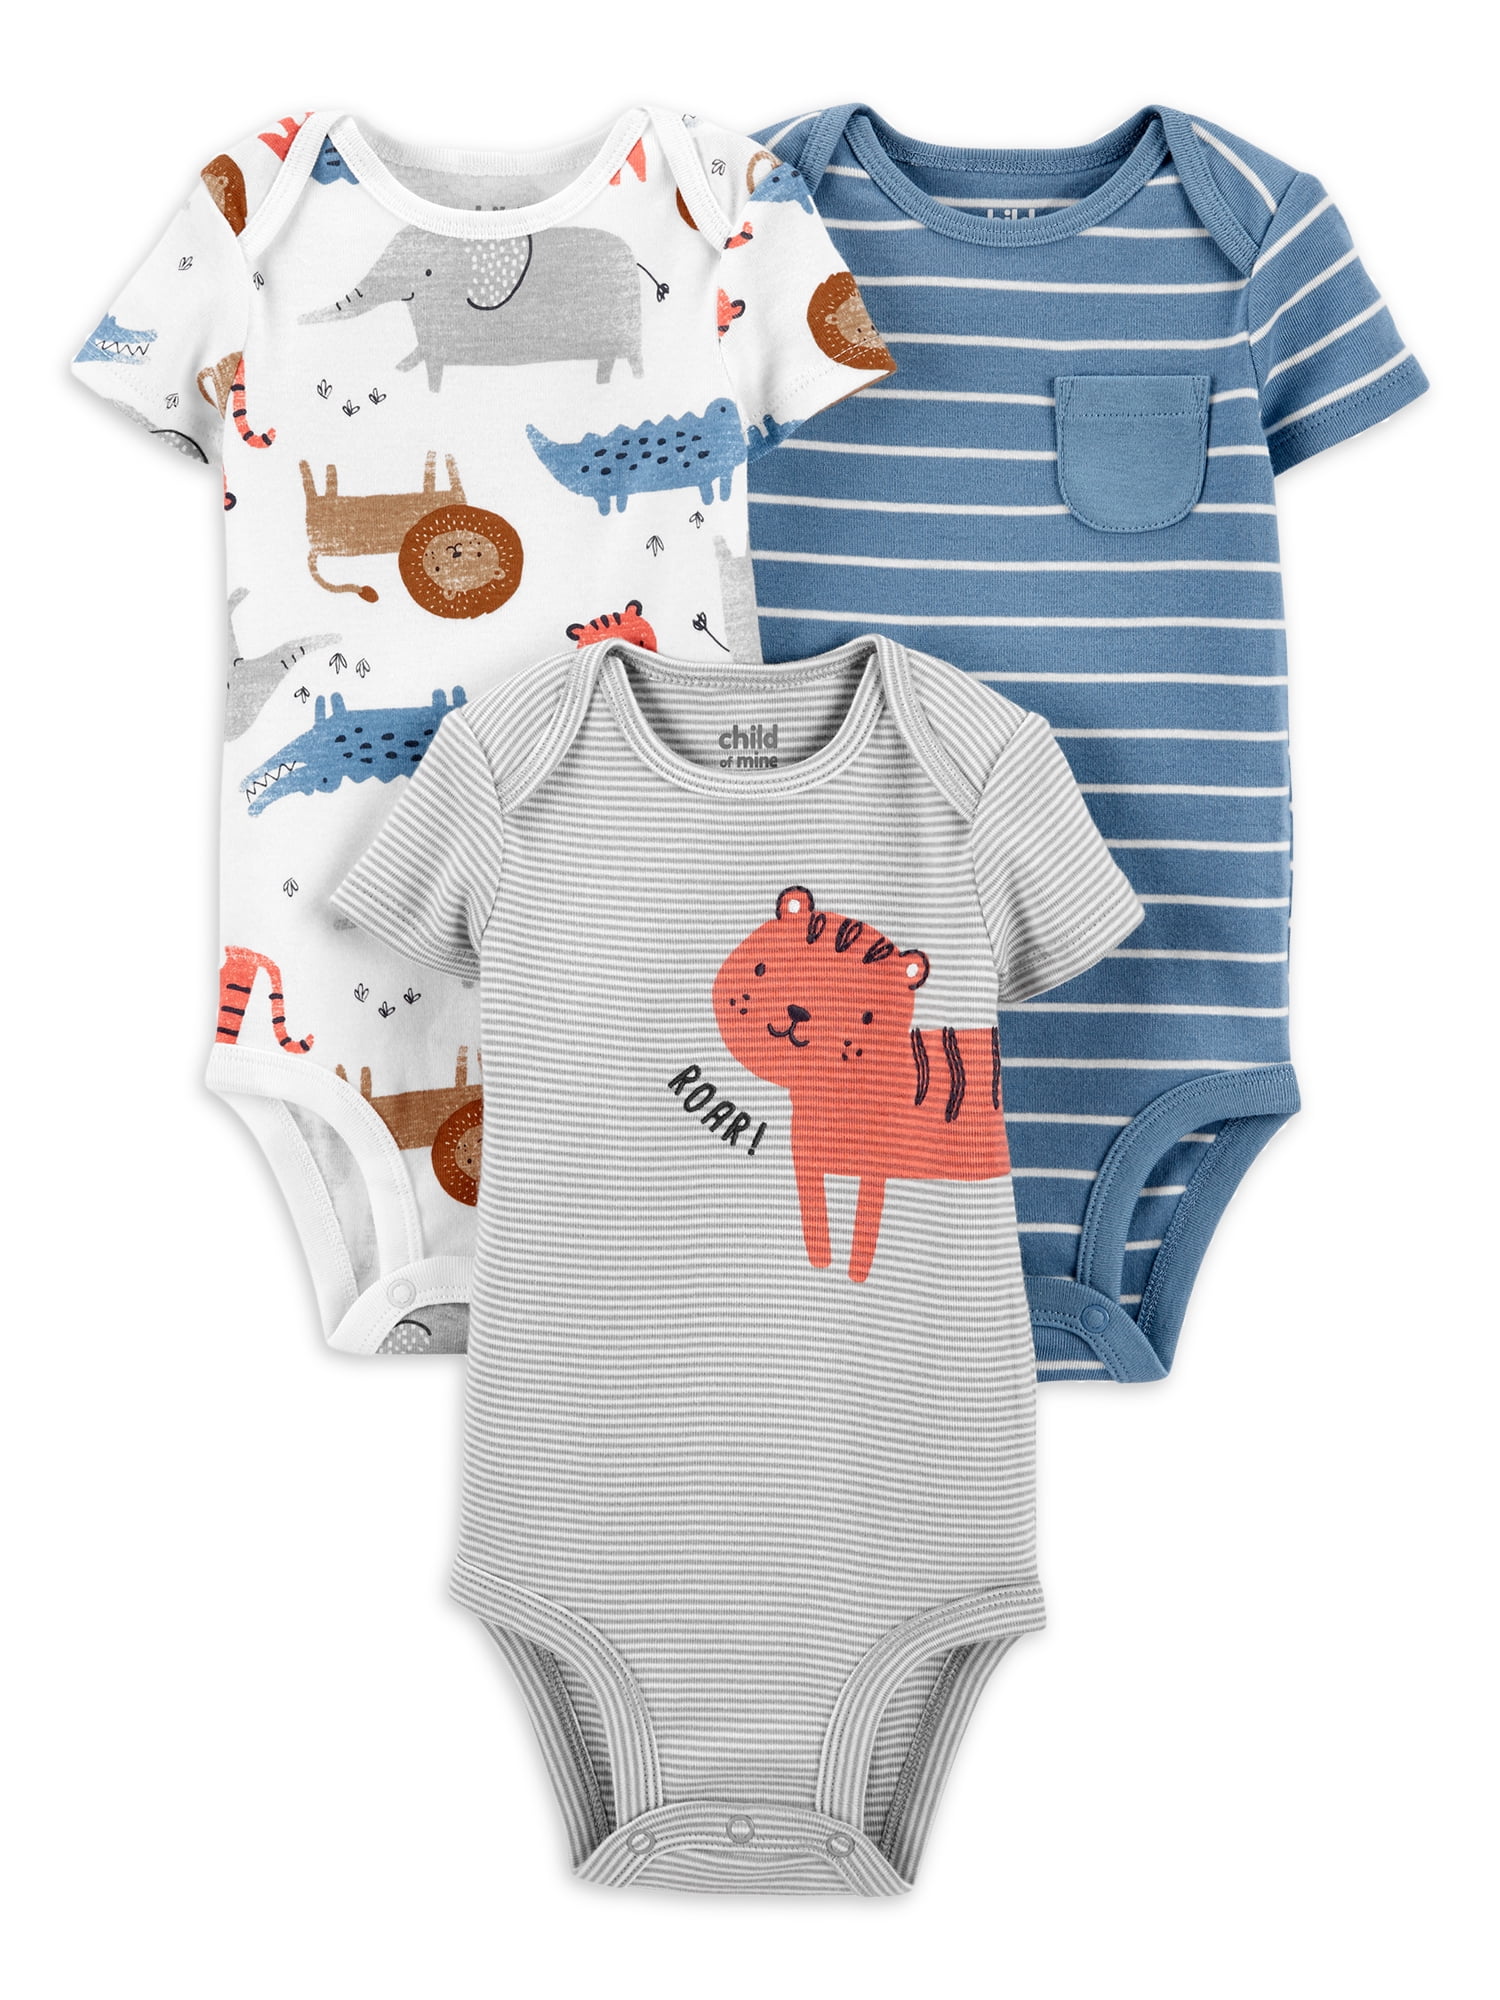 Carters Baby Boys 2-Pack Puppy Gowns 3 Months 